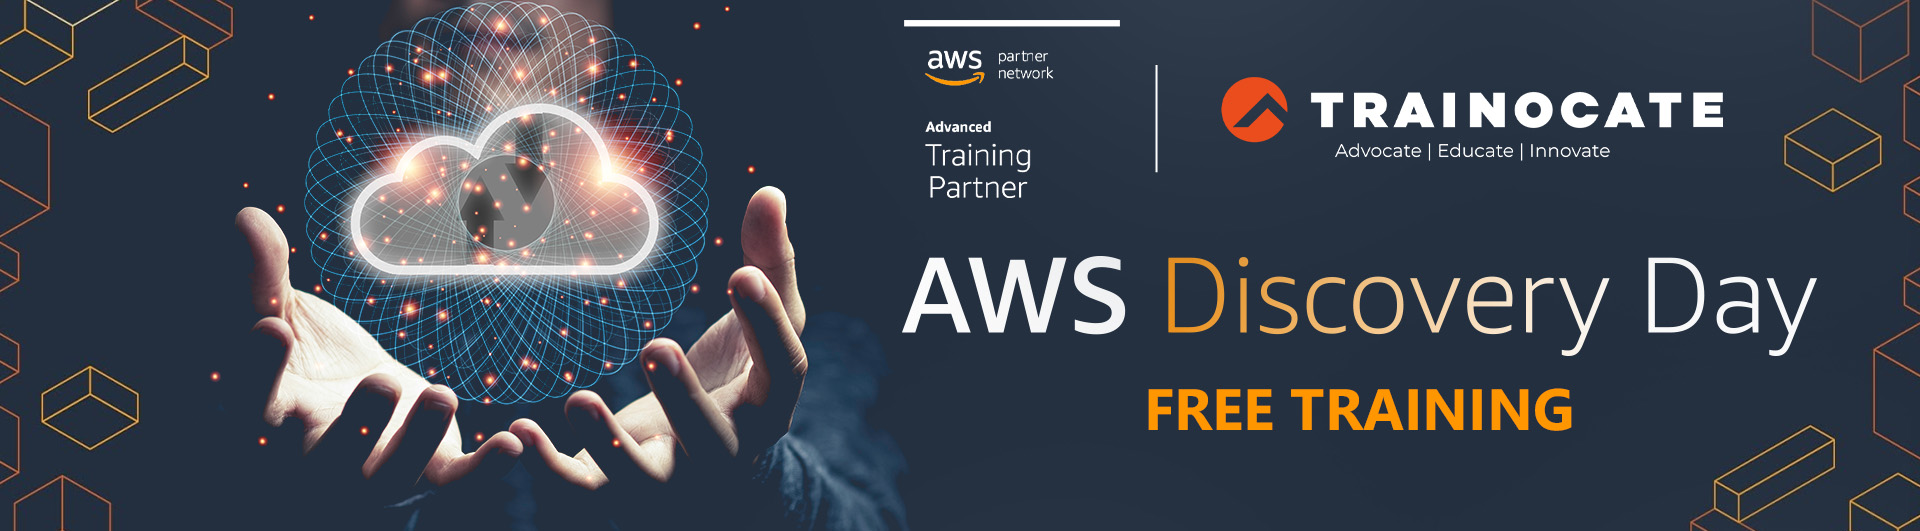 AWS_Discovery_Day_Landing_page_lk_banner